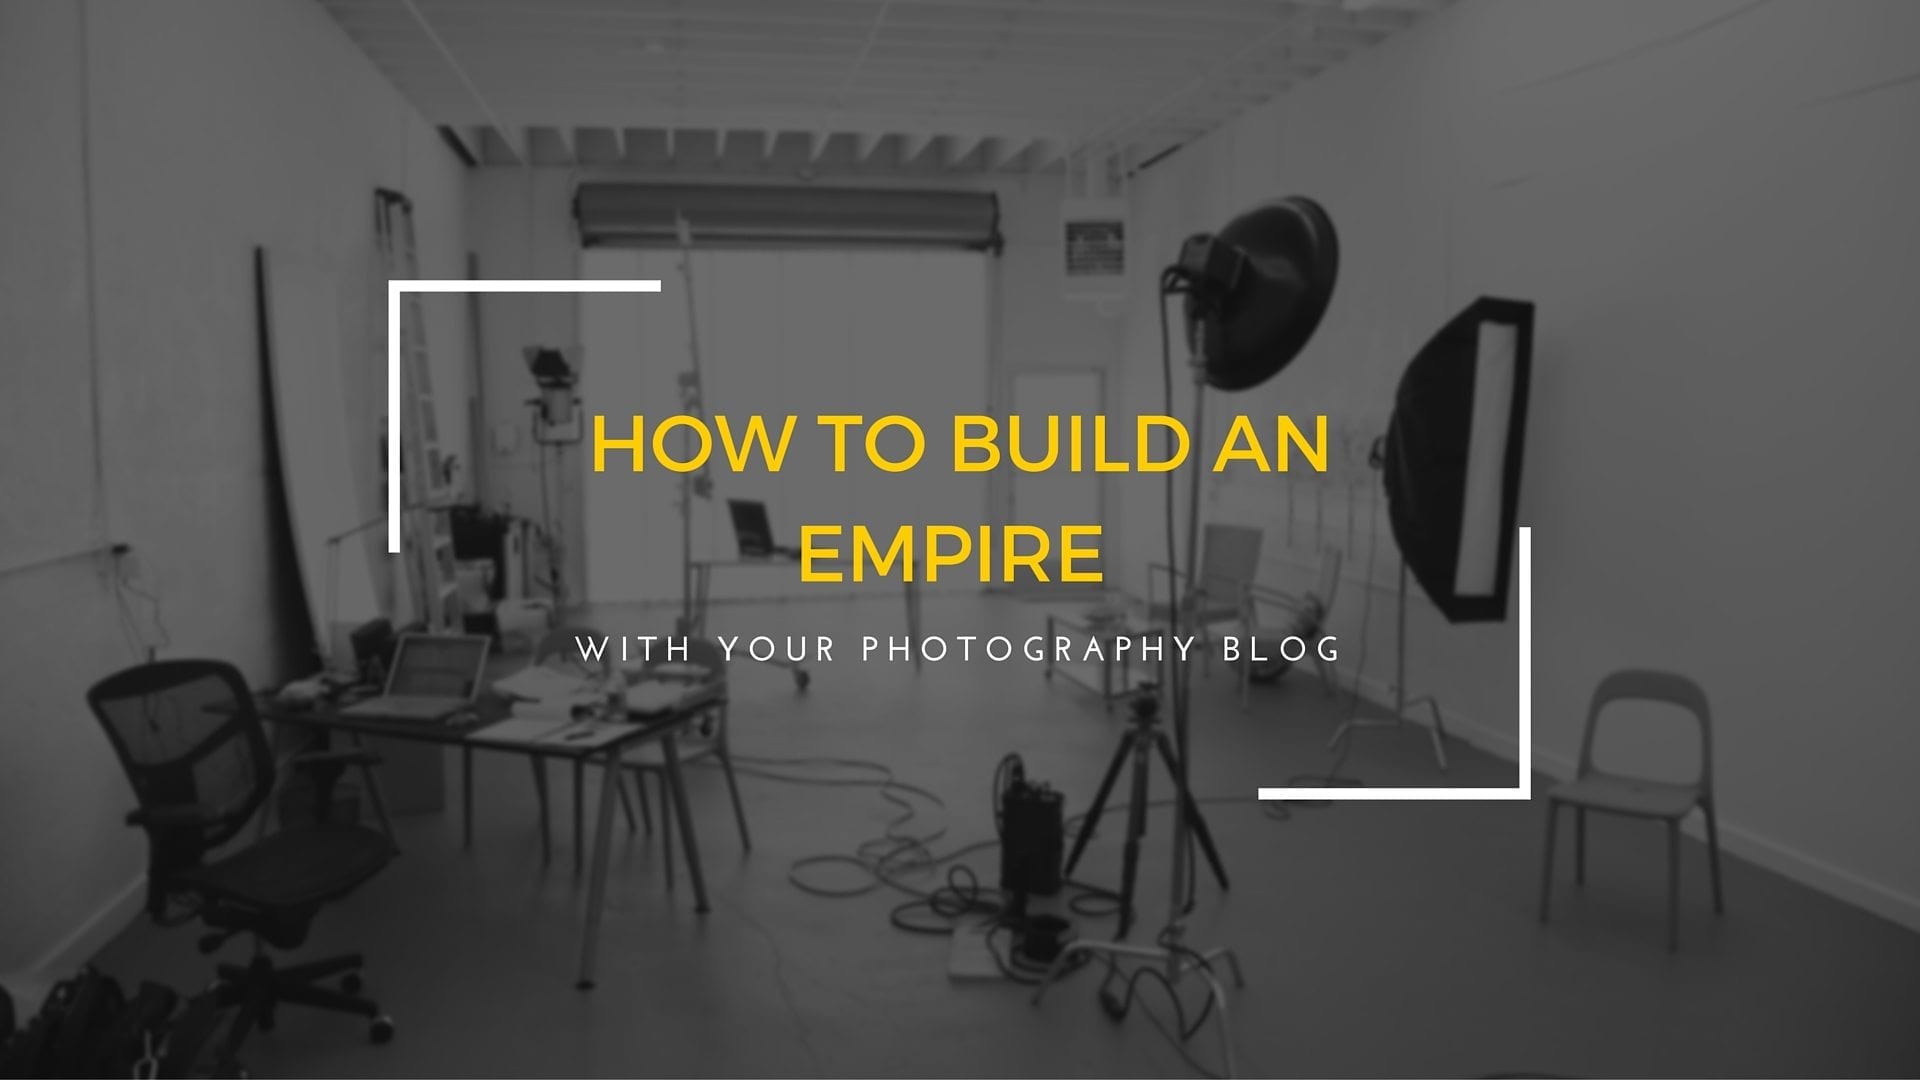 How to build an empire with your photography blog